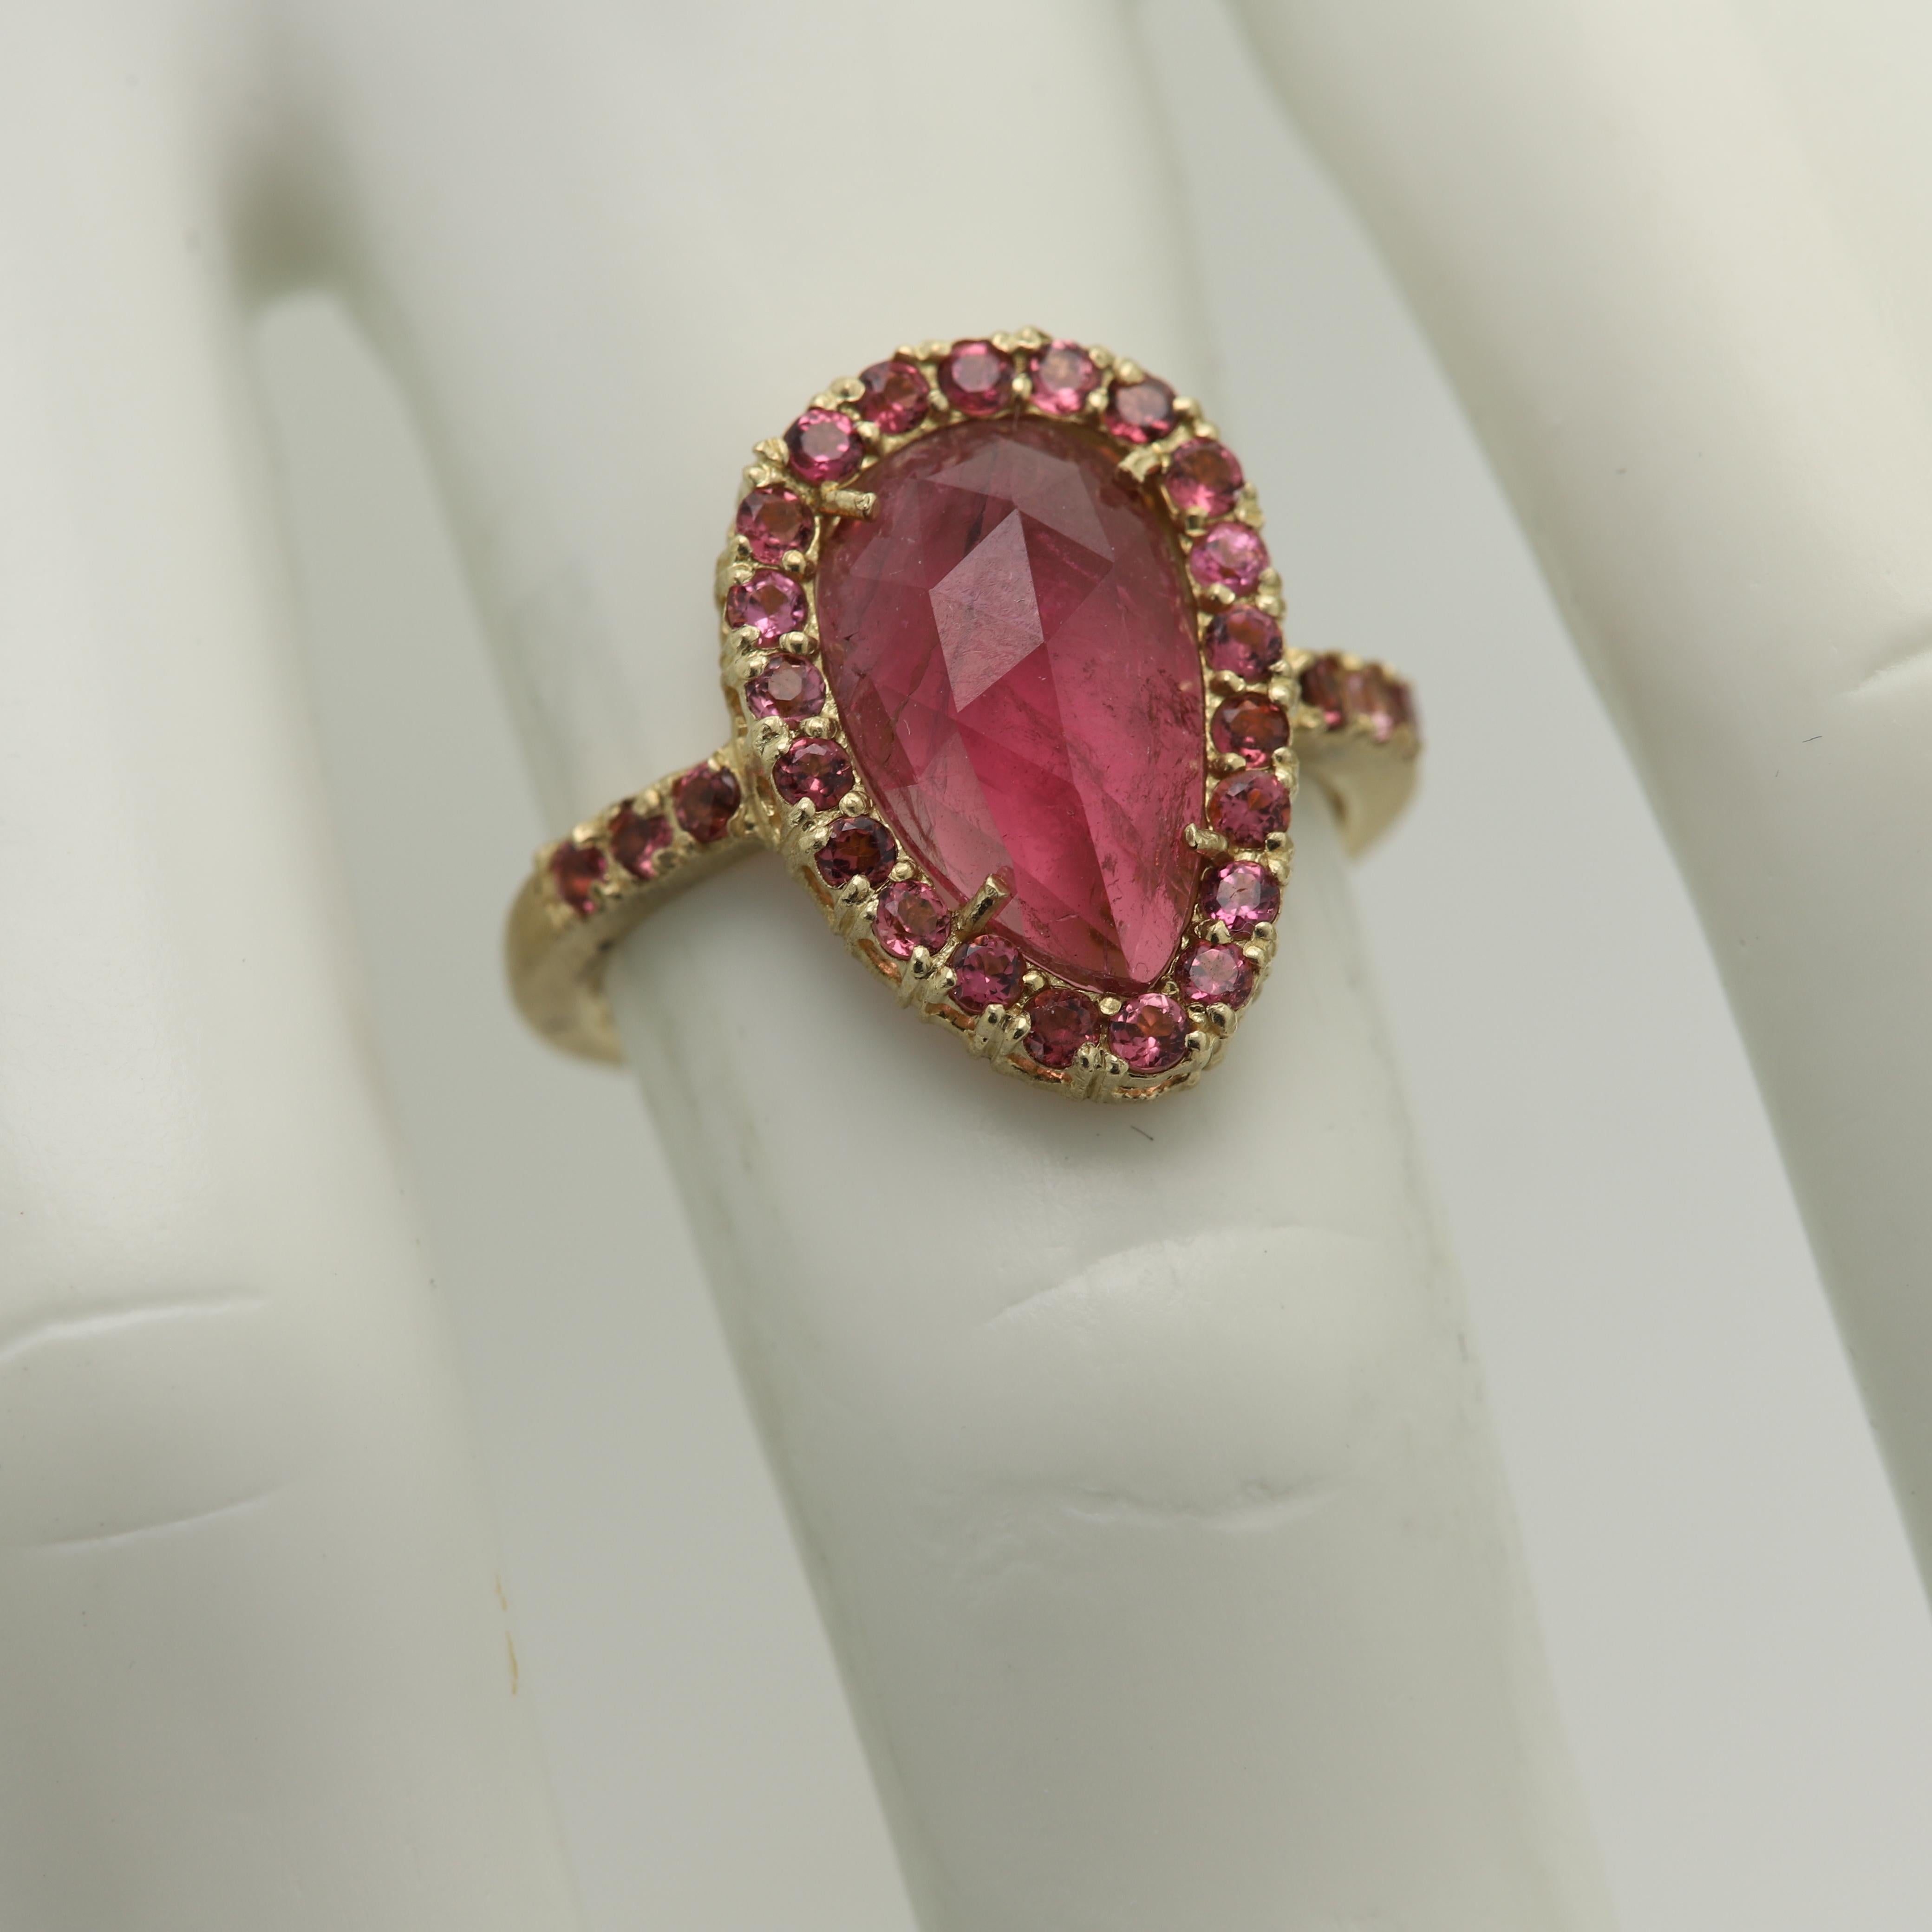 Vintage Pink Tourmaline Ring - Hand Made in Italy
14k Yellow Gold 4.8 grams - mat finish (not shiny)
Small Round Pink Tourmaline around on the sides 0.58 ct
Center is a 